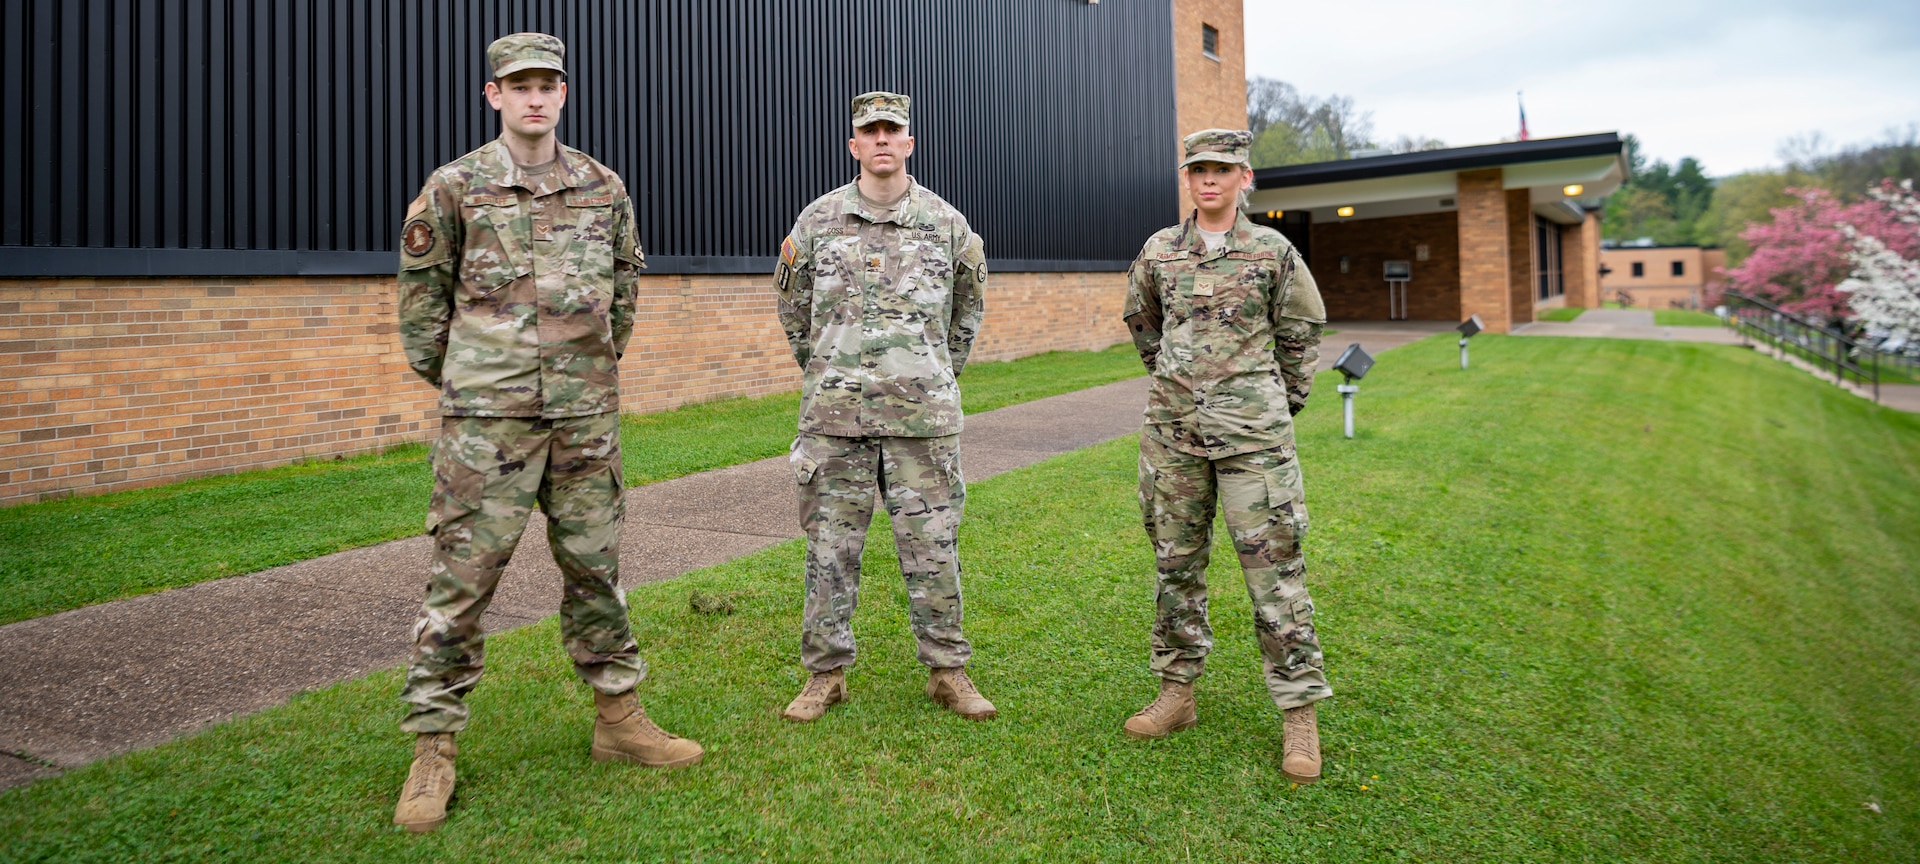 Senior Airman Will Wagstaff, left, Maj. Ryan Coss, center, and Senior Airman Carly Farmer outside the West Virginia National Guard Joint Forces Headquarters in Charleston, W.Va. Coss, Wagstaff and Farmer are serving on Task Force Petersen, which is forecasting demand for medical supplies in the state during the COVID-19 pandemic.